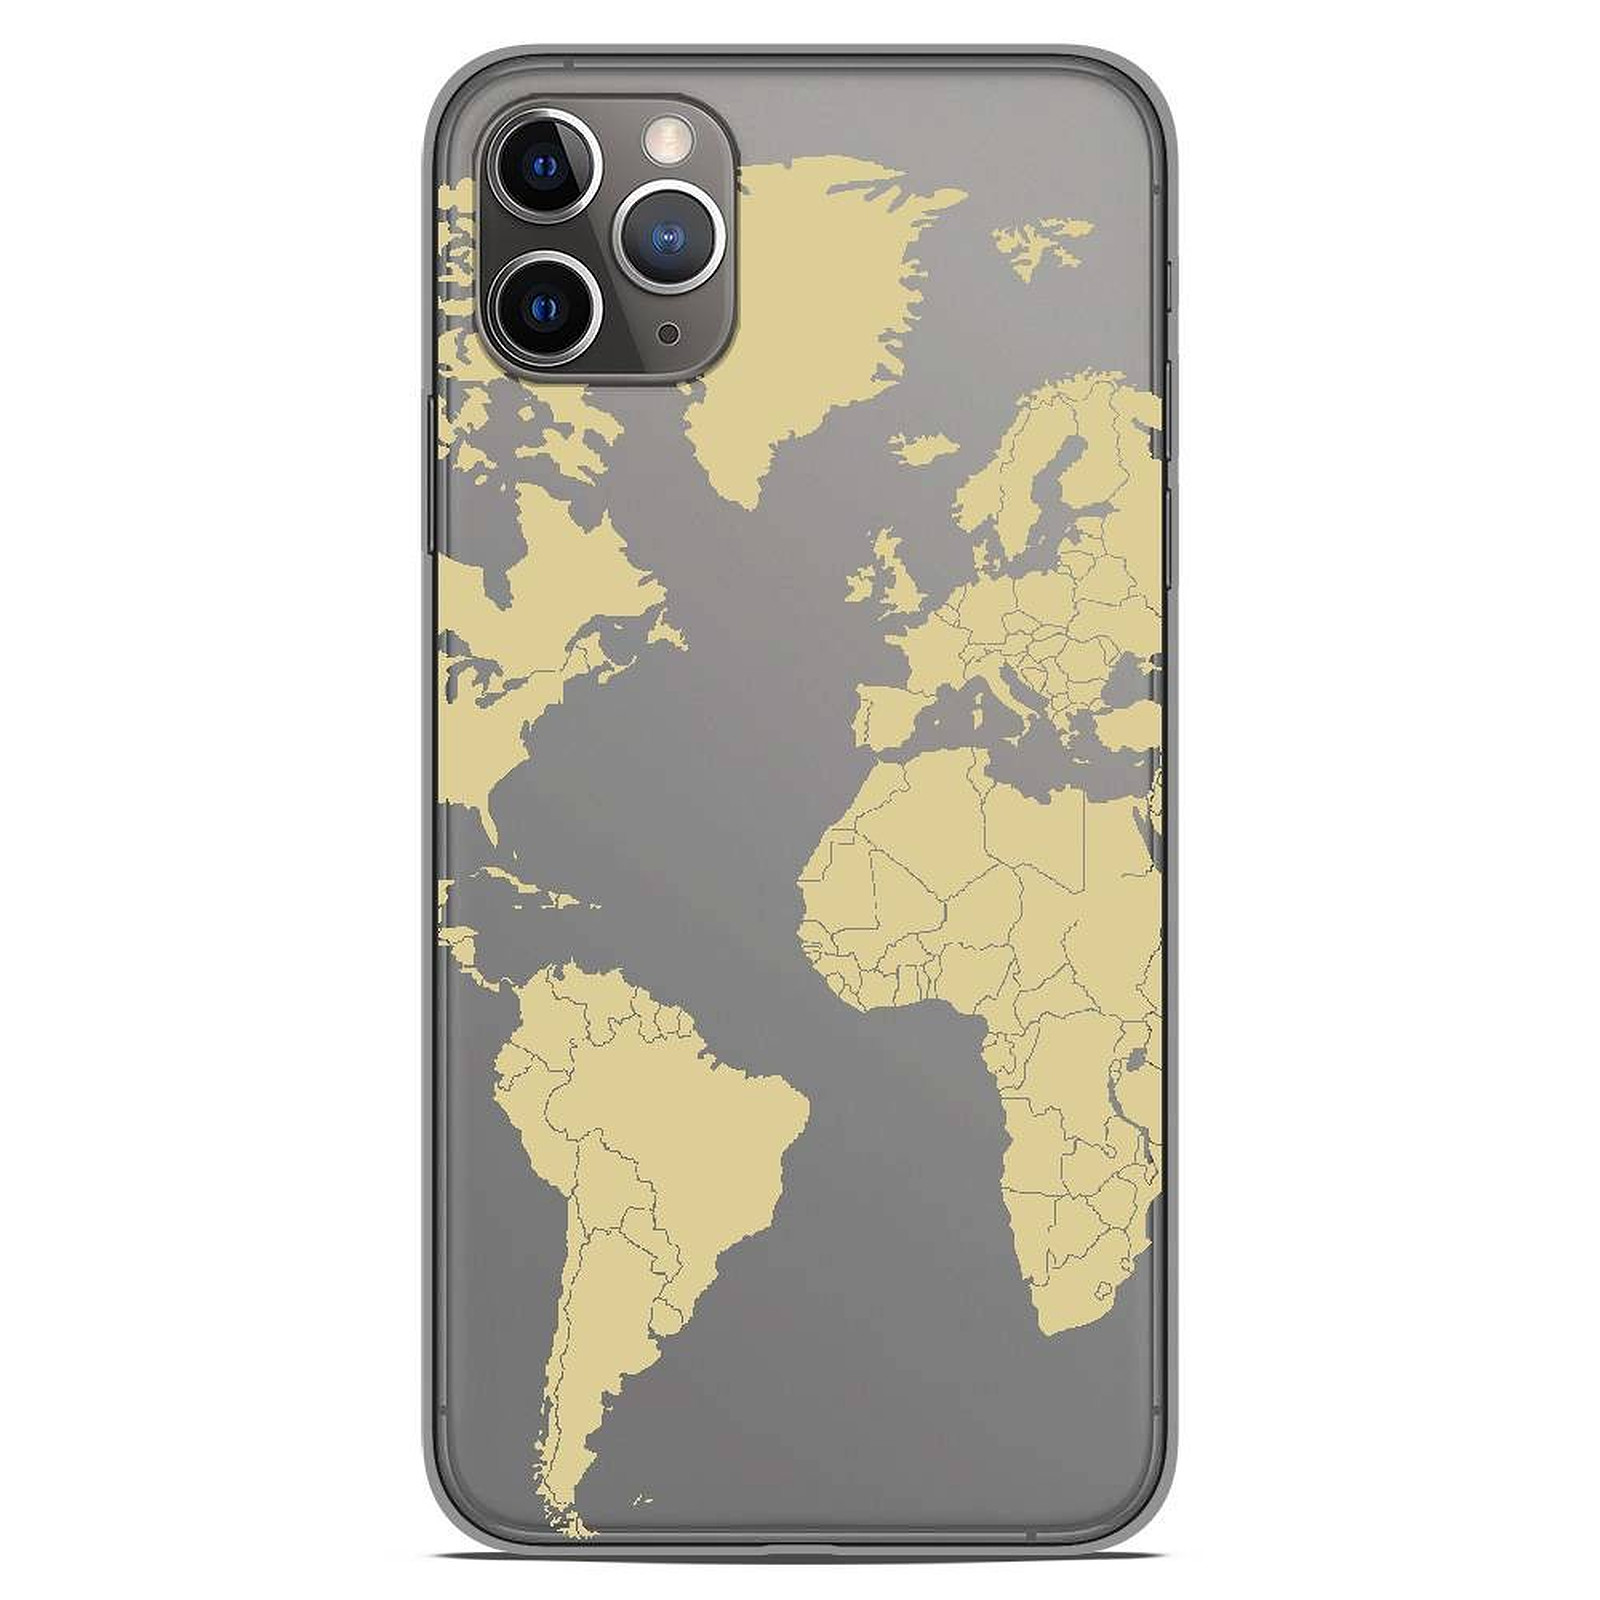 1001 Coques Coque silicone gel Apple iPhone 11 Pro Max motif Map beige - Coque telephone 1001Coques